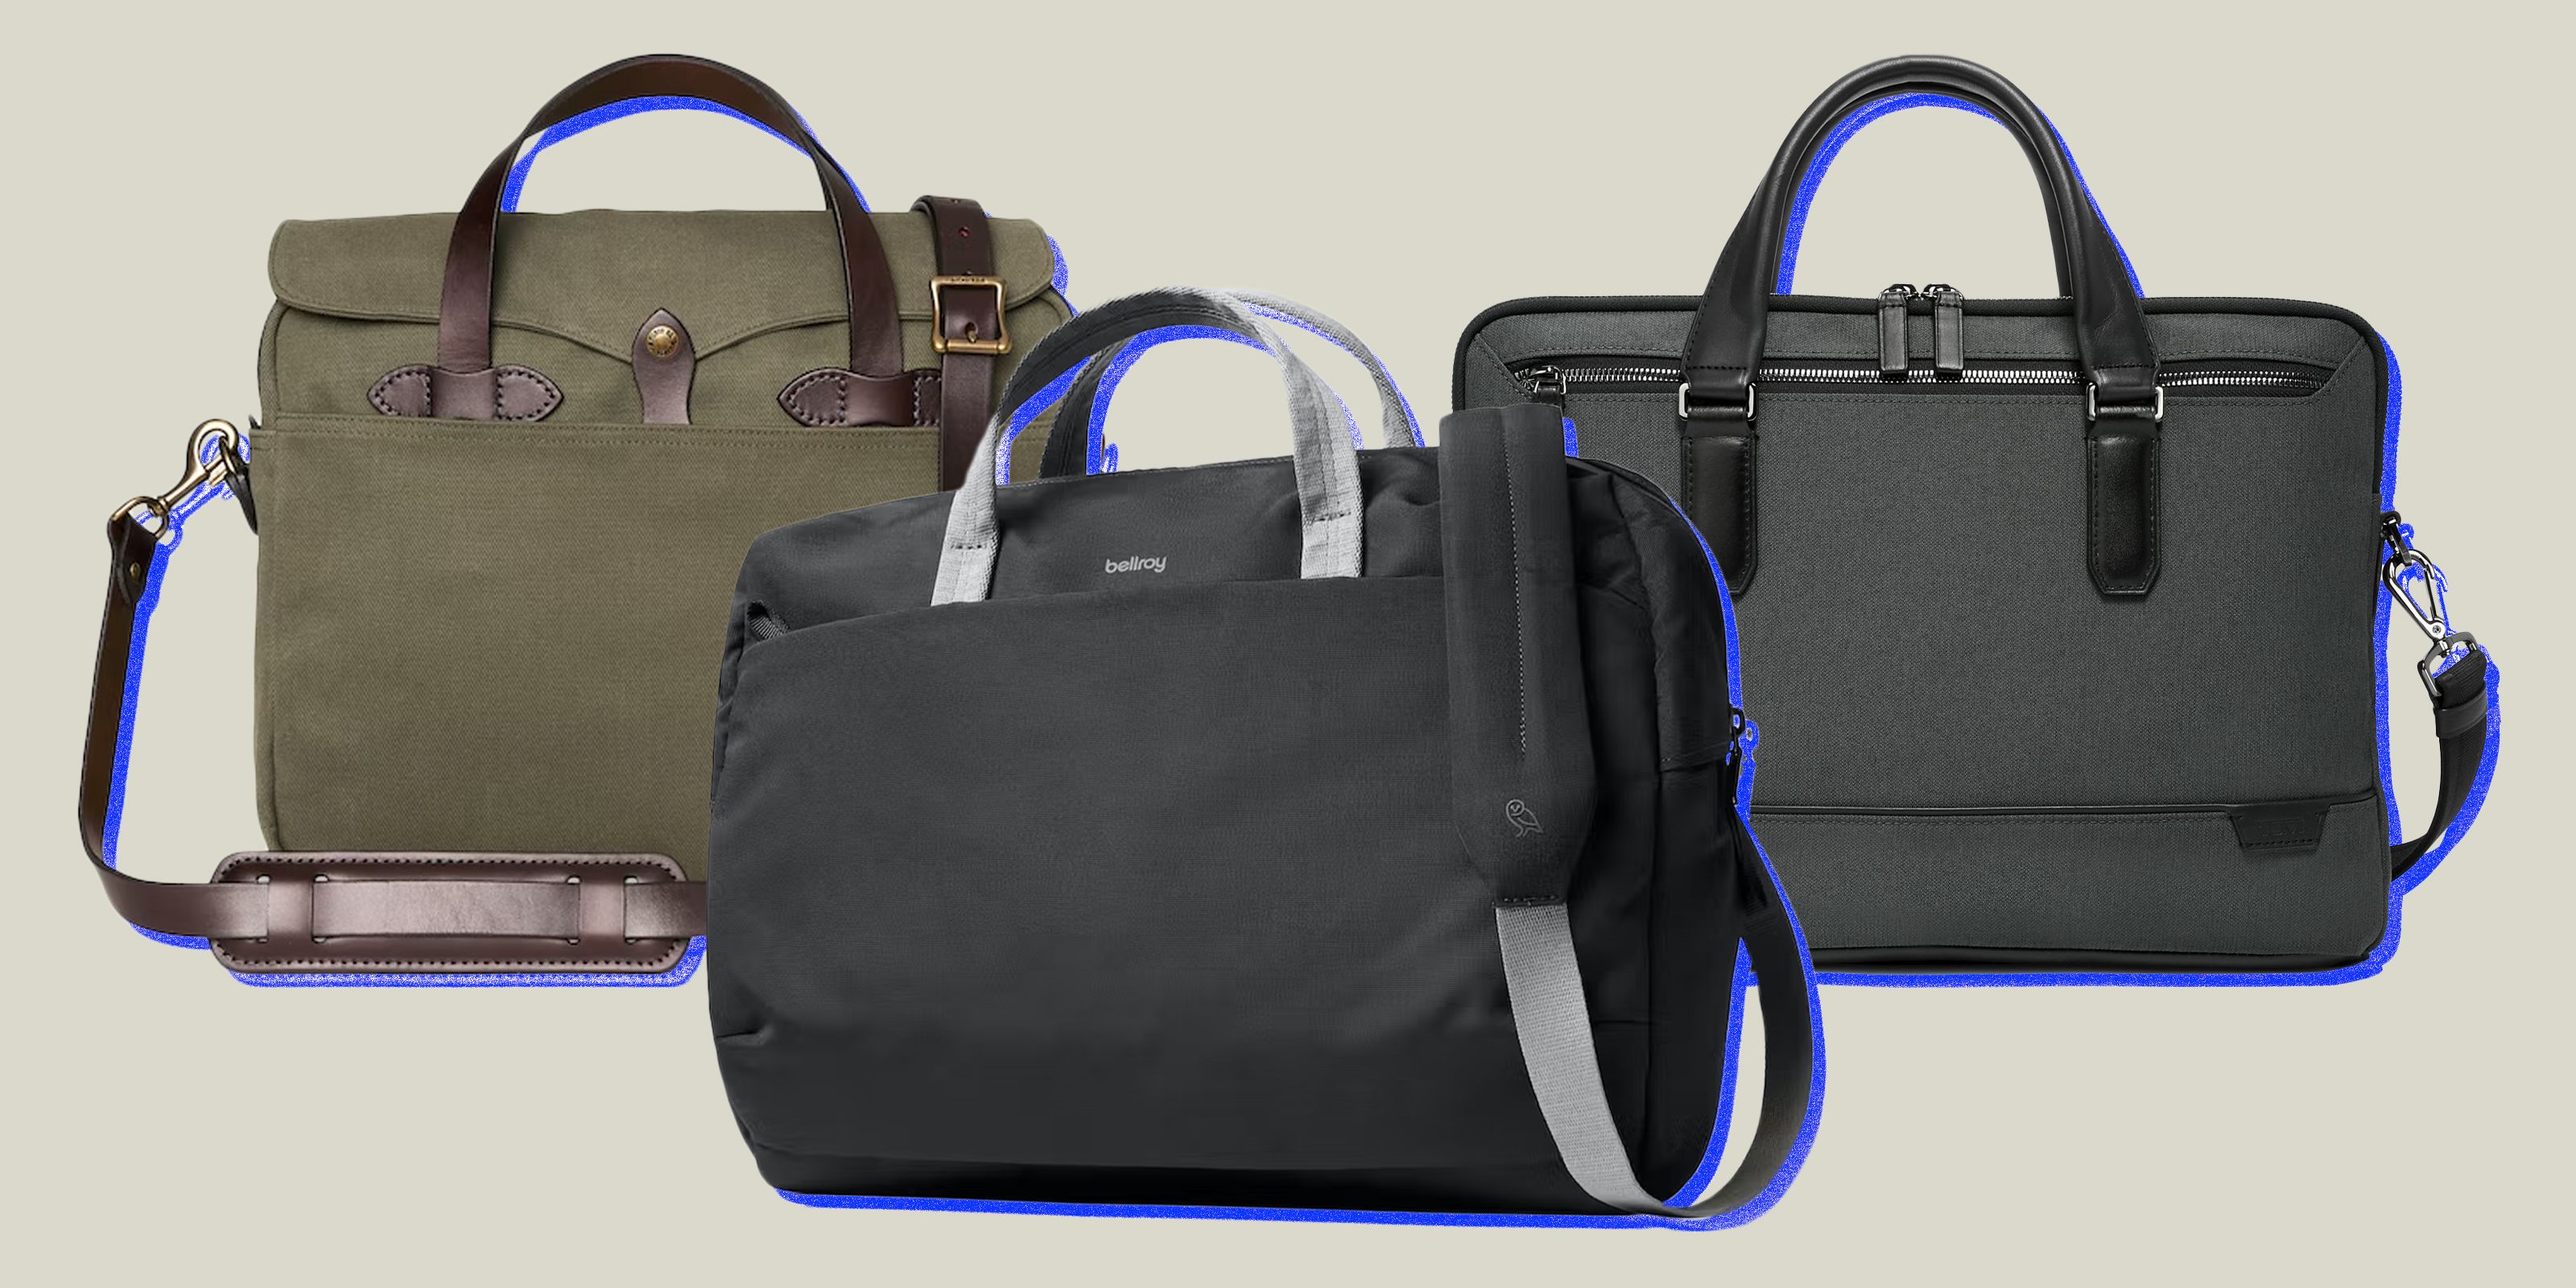 The Best Laptop ﻿Bags for Carrying Your Precious Cargo